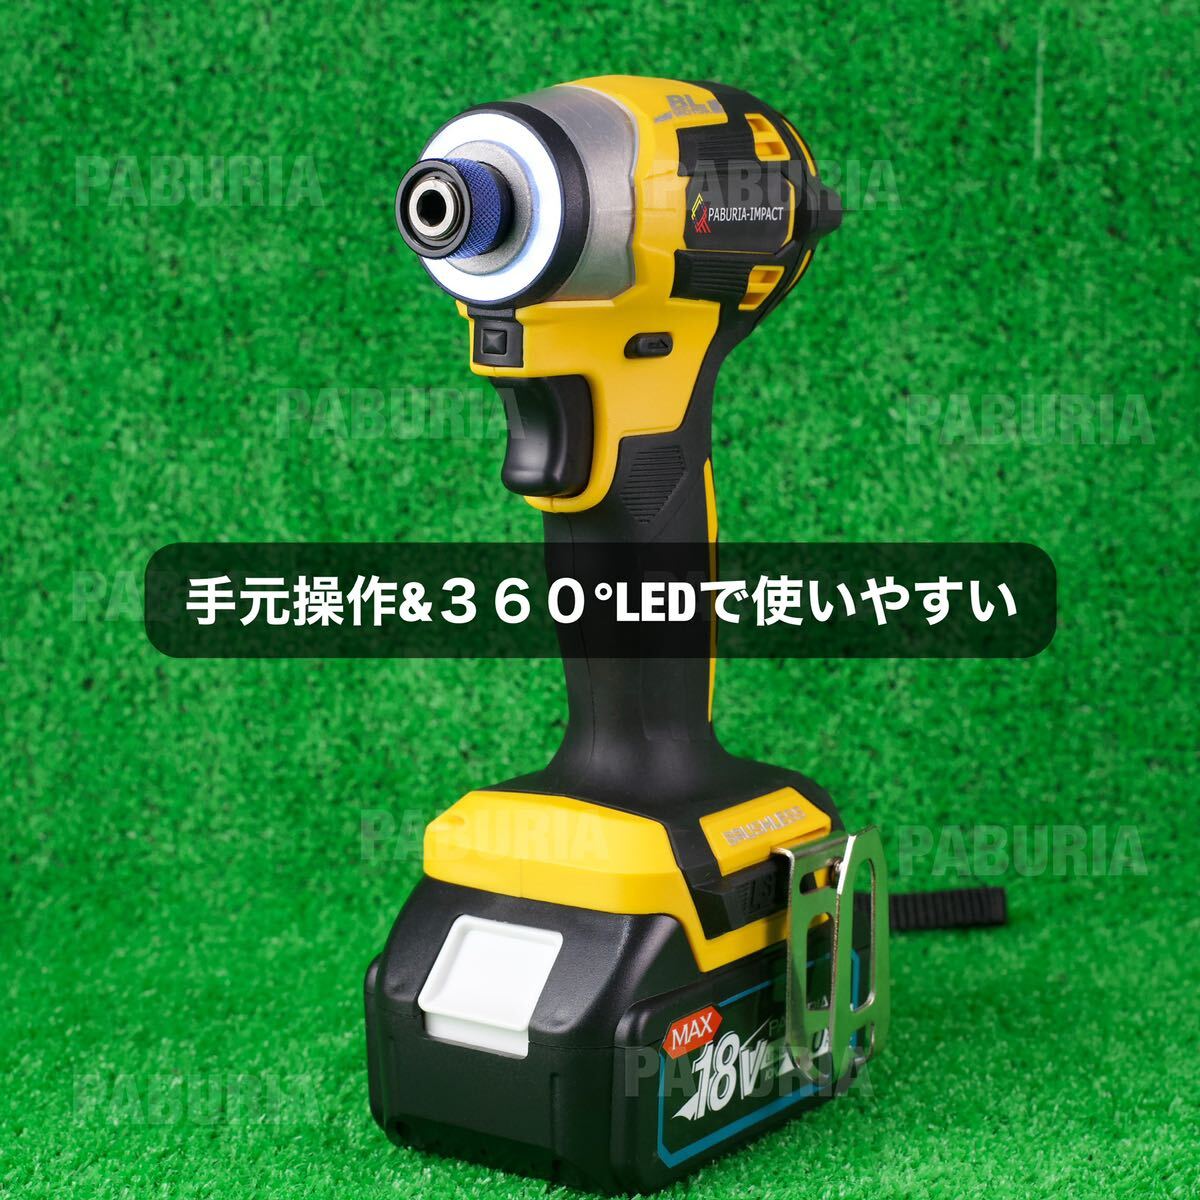 [2024 new model model ]173 newest PABURIA new model BL model Makita 18v interchangeable impact driver yellow color [ receipt issue possibility ]